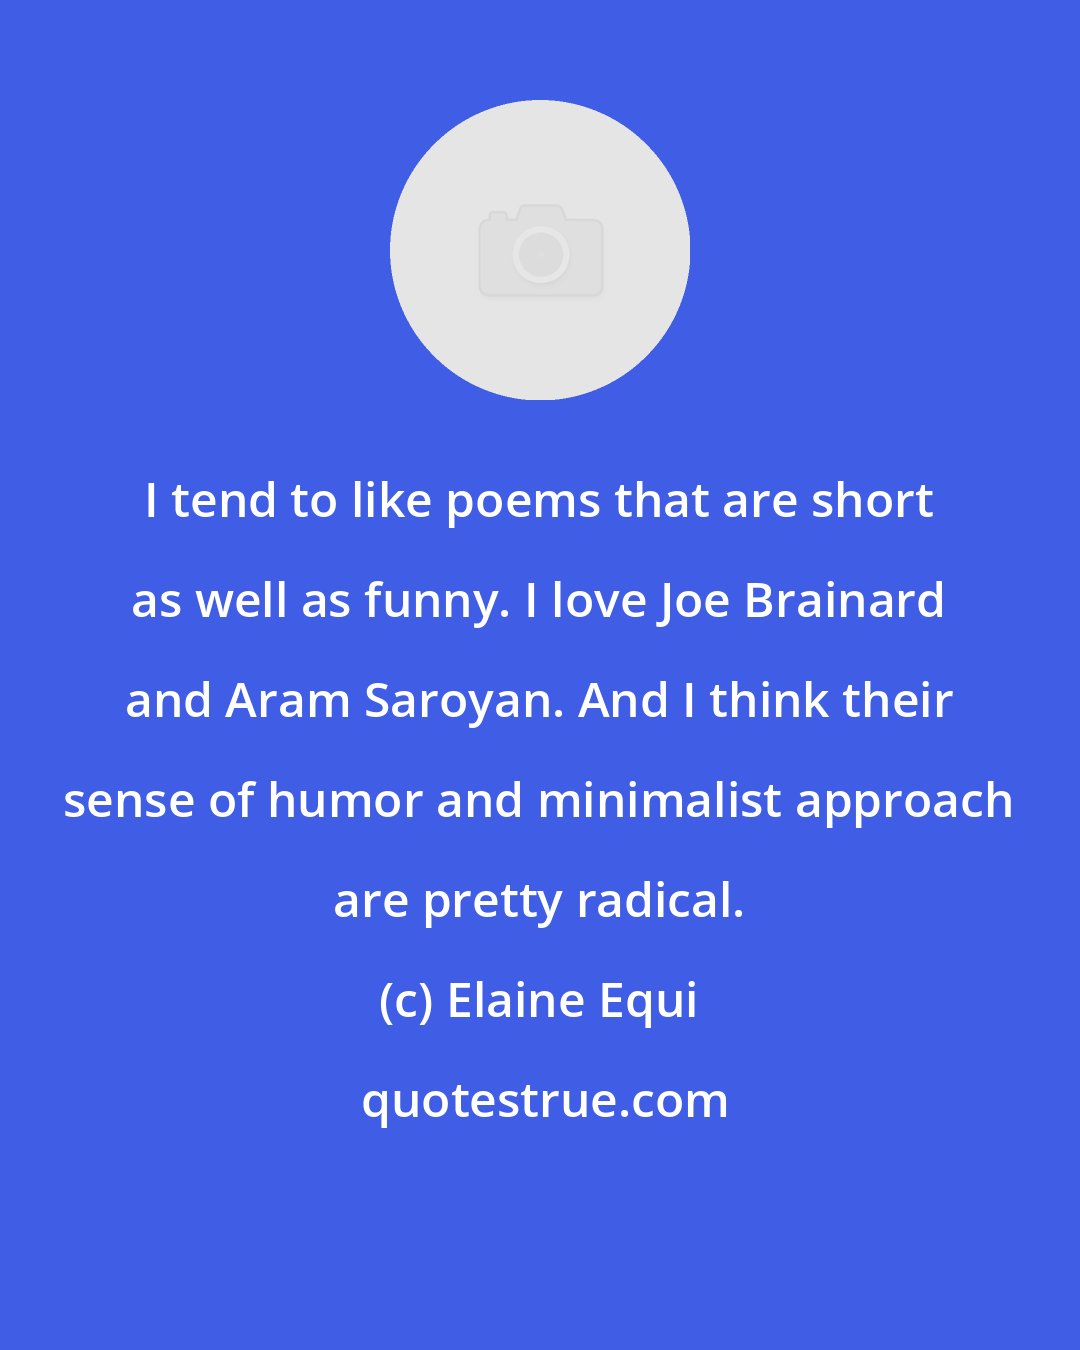 Elaine Equi: I tend to like poems that are short as well as funny. I love Joe Brainard and Aram Saroyan. And I think their sense of humor and minimalist approach are pretty radical.